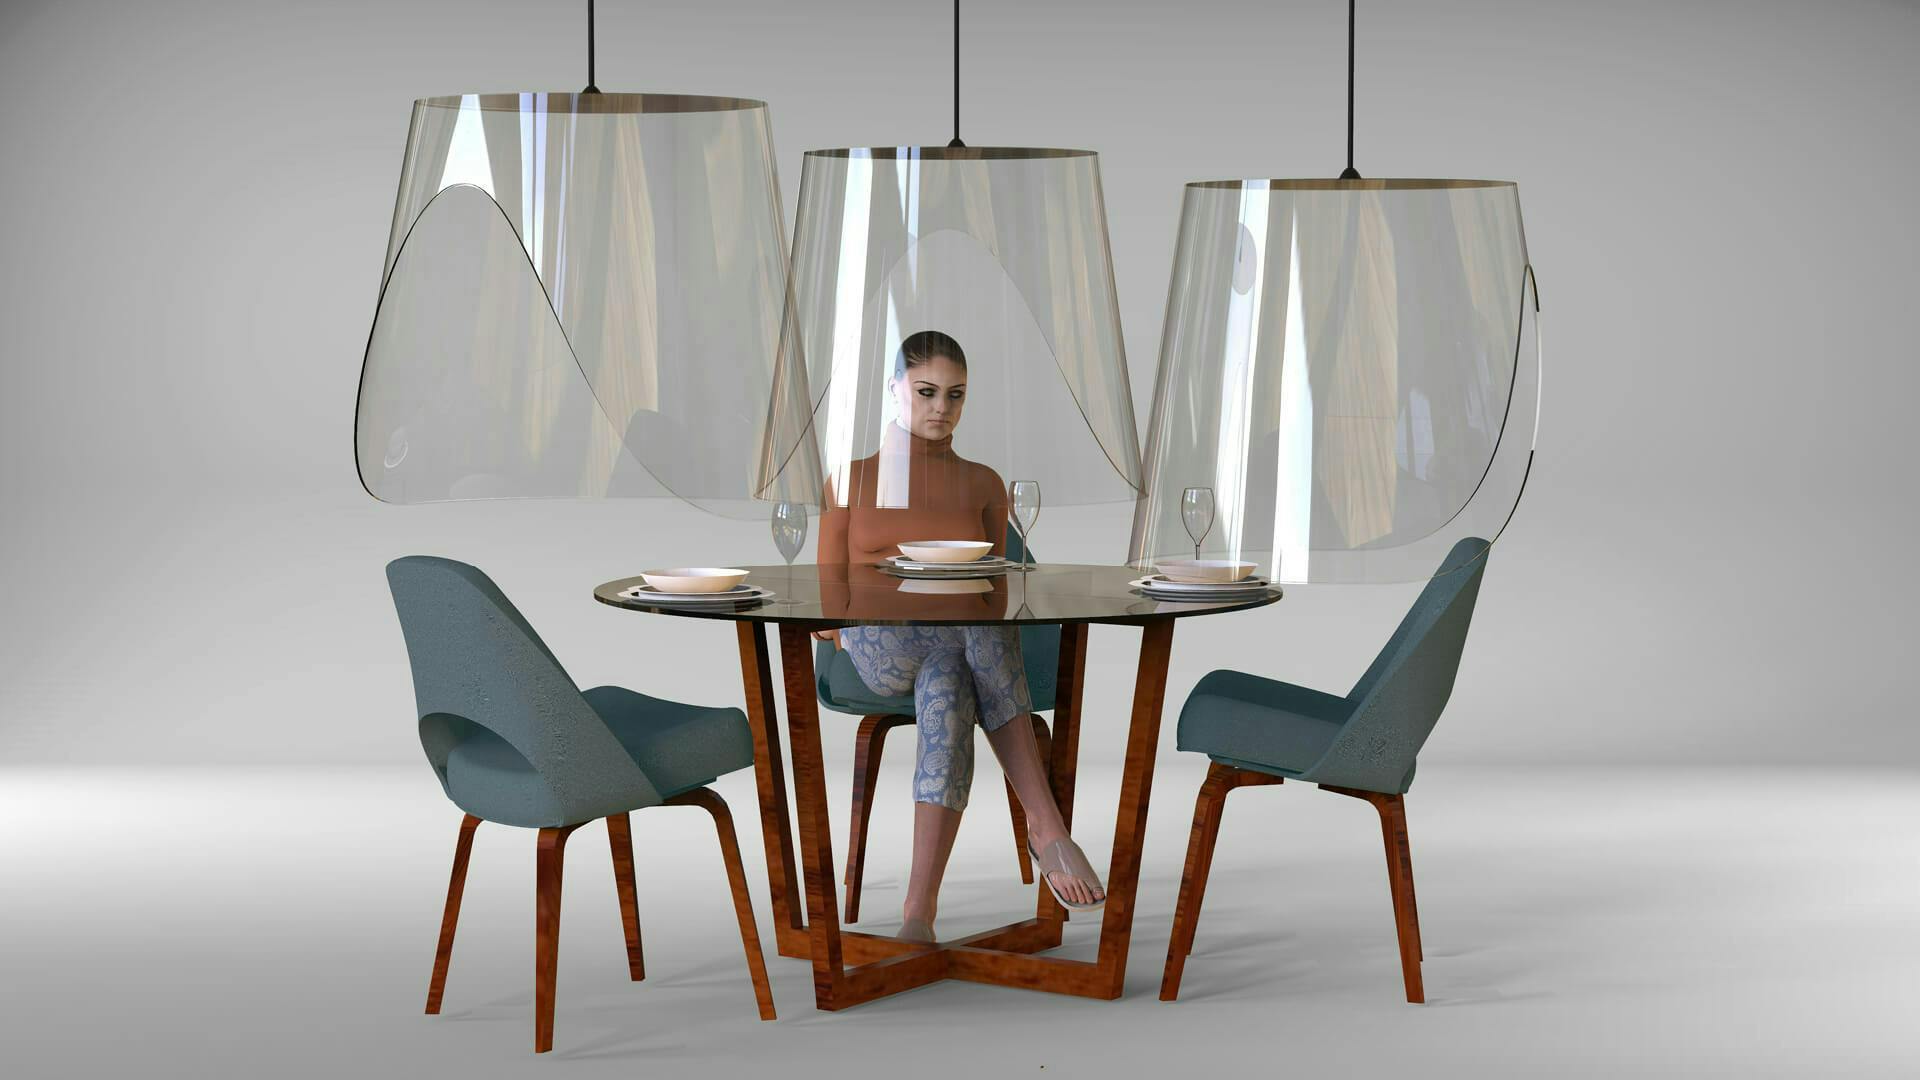 furniture chair tabletop table person human dining table